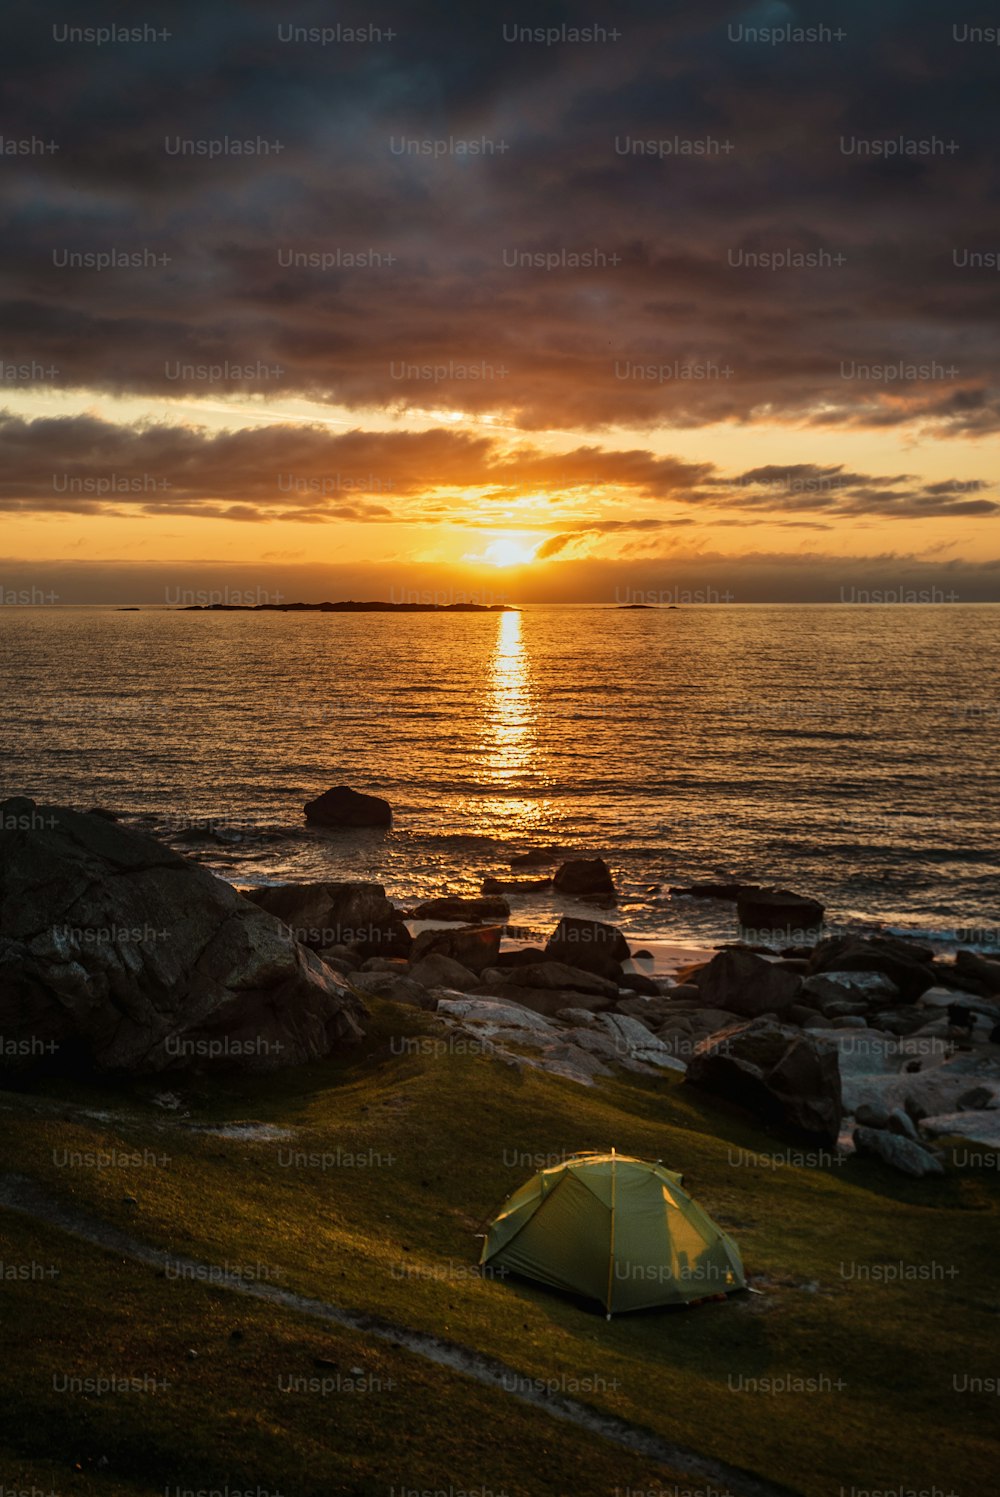 a tent is set up on a rocky beach at sunset